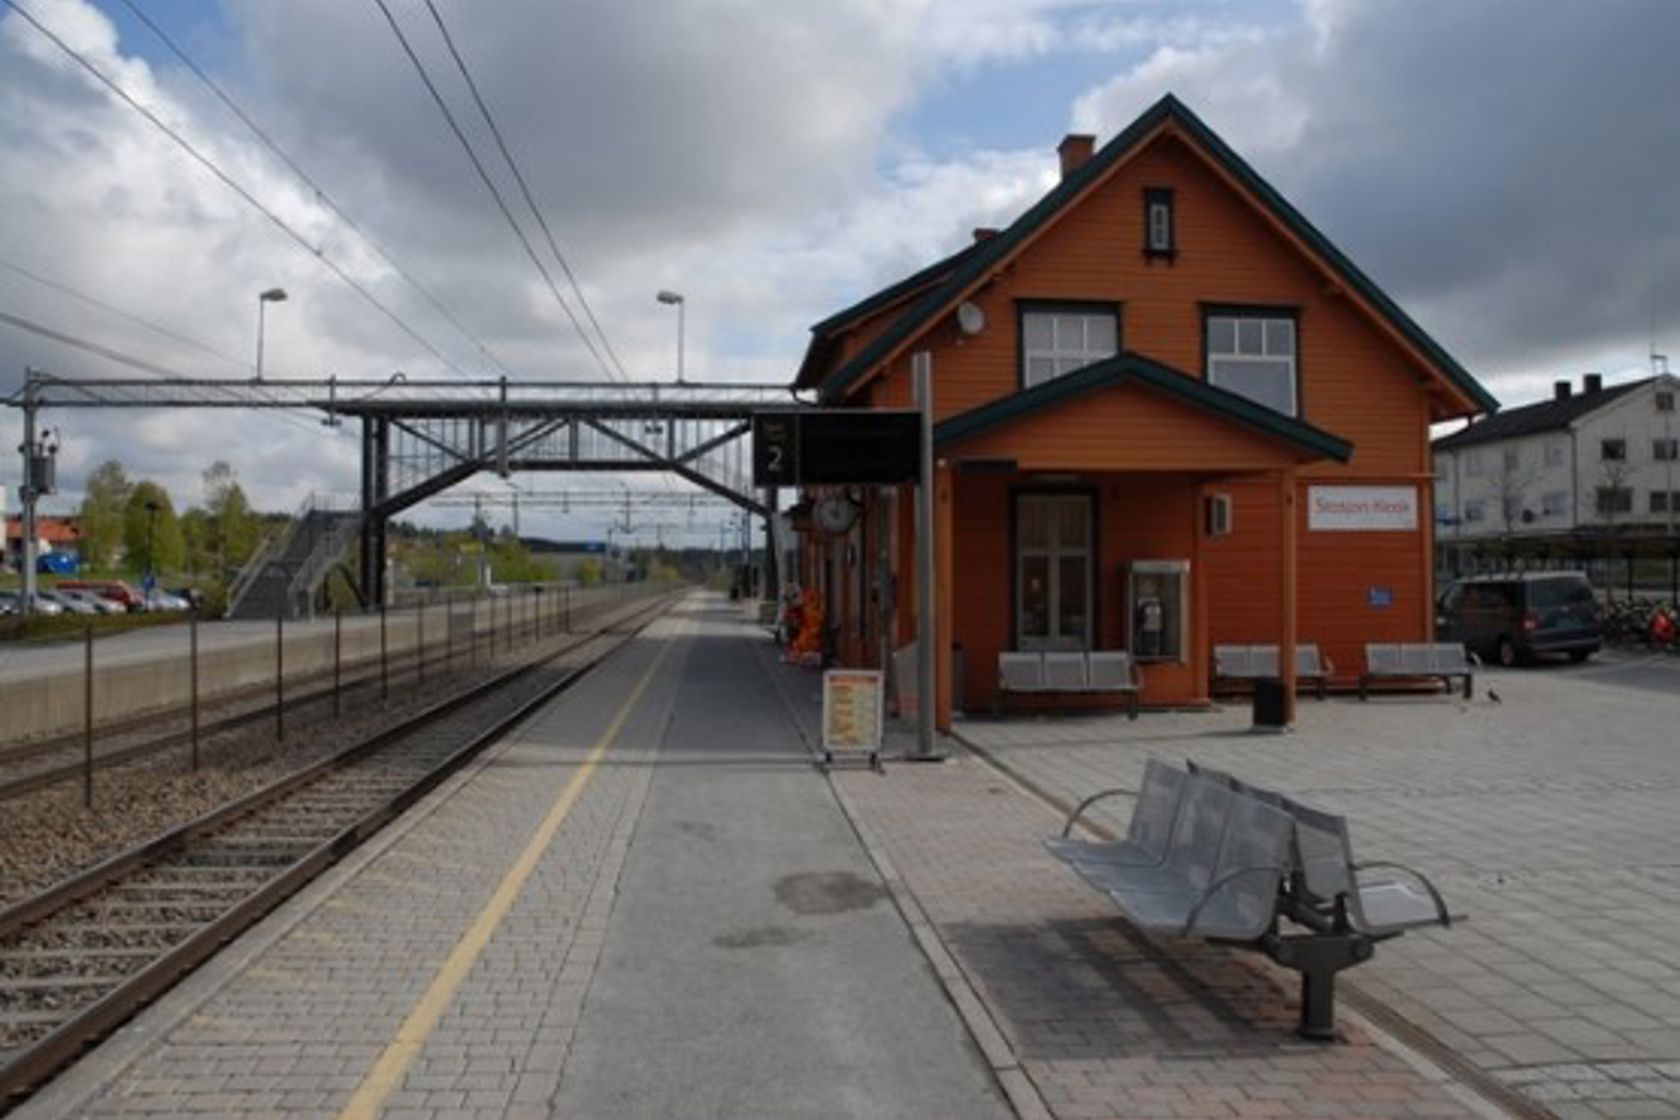 Exterior view of Vestby station